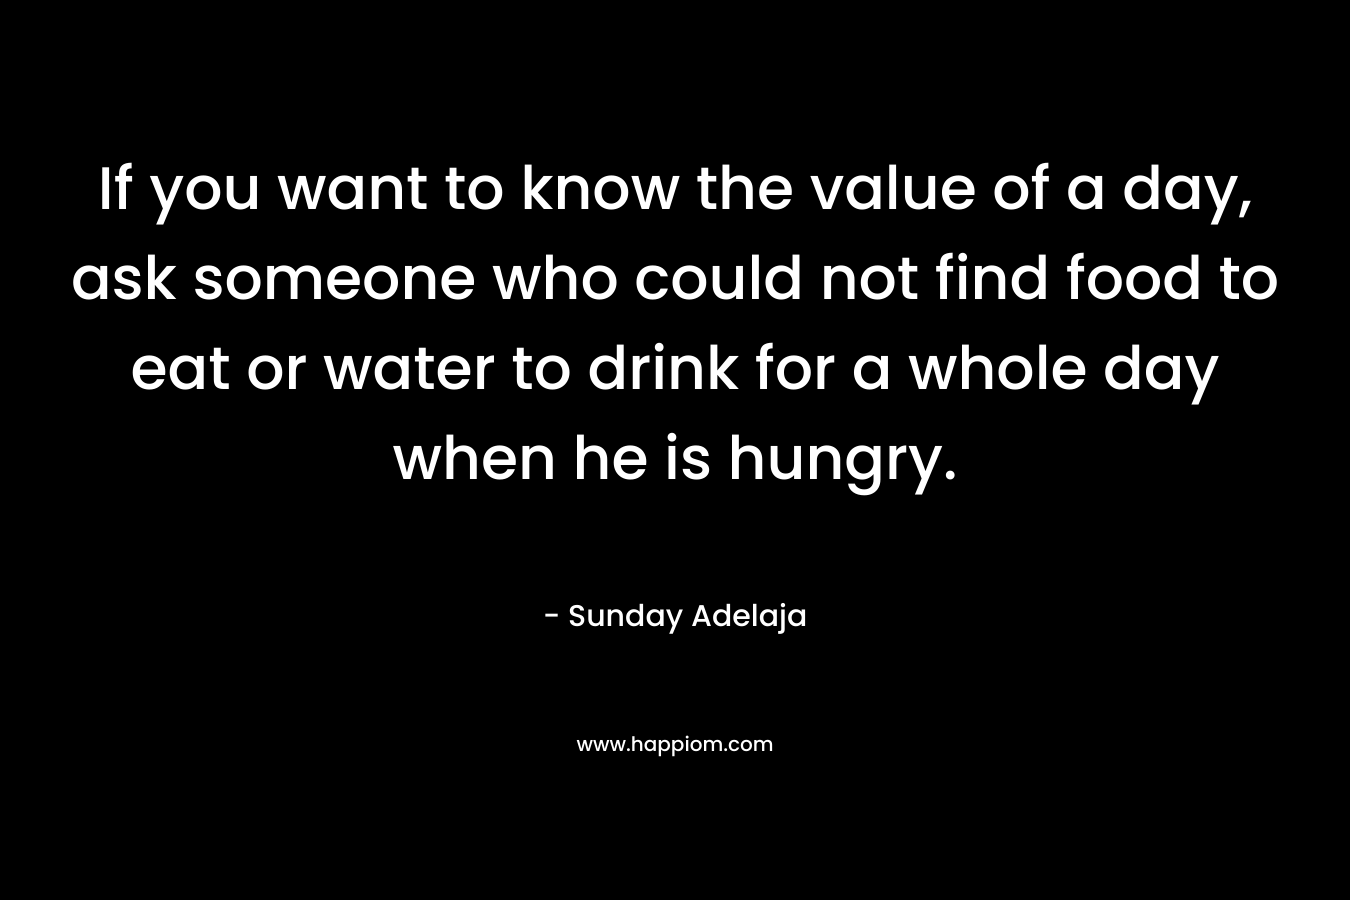 If you want to know the value of a day, ask someone who could not find food to eat or water to drink for a whole day when he is hungry.